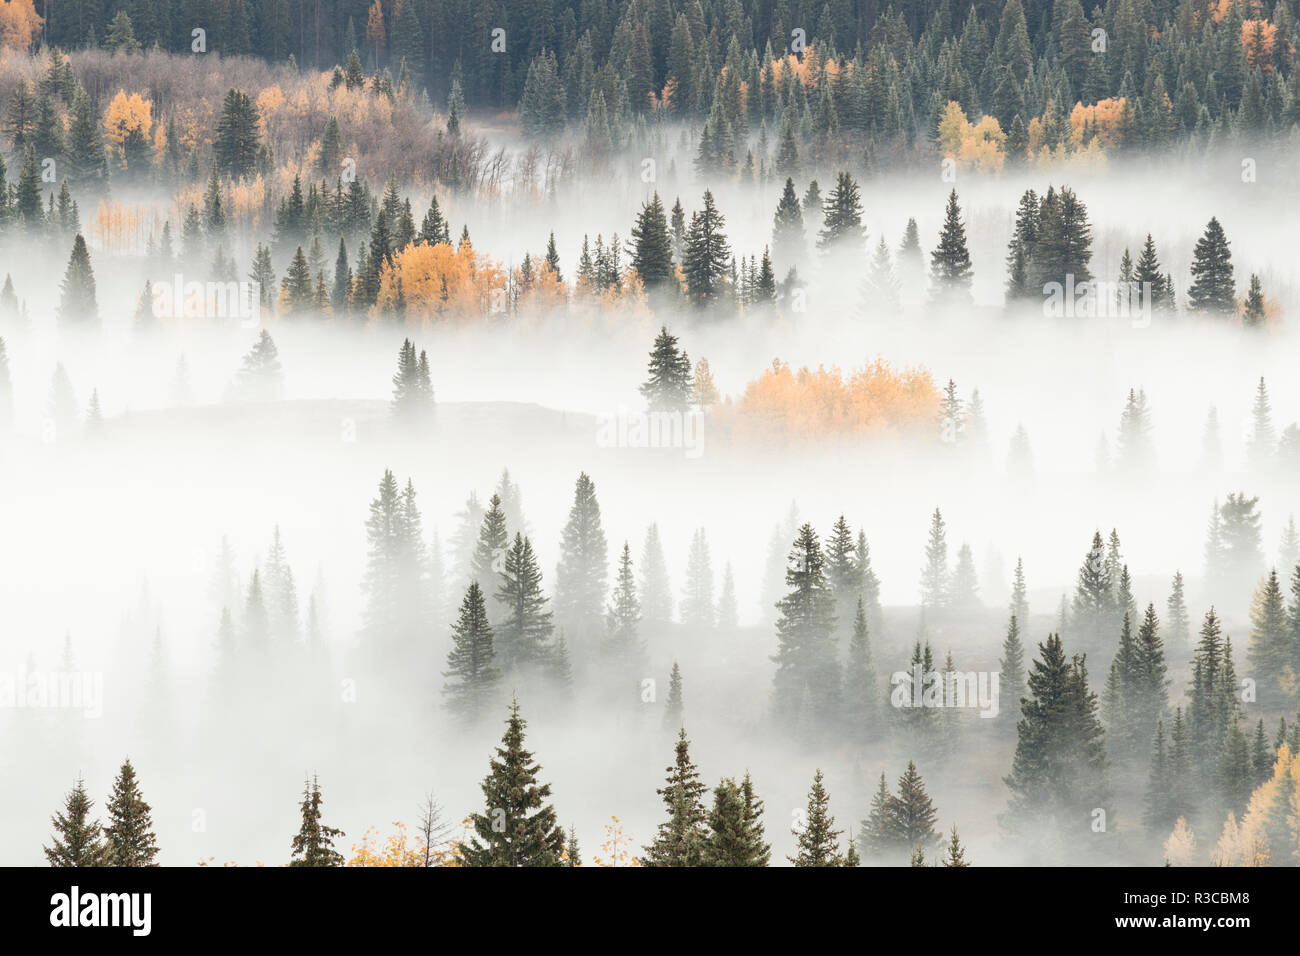 USA, Colorado, San Juan National Forest. Dawn ground fog covers mountain forest. Stock Photo